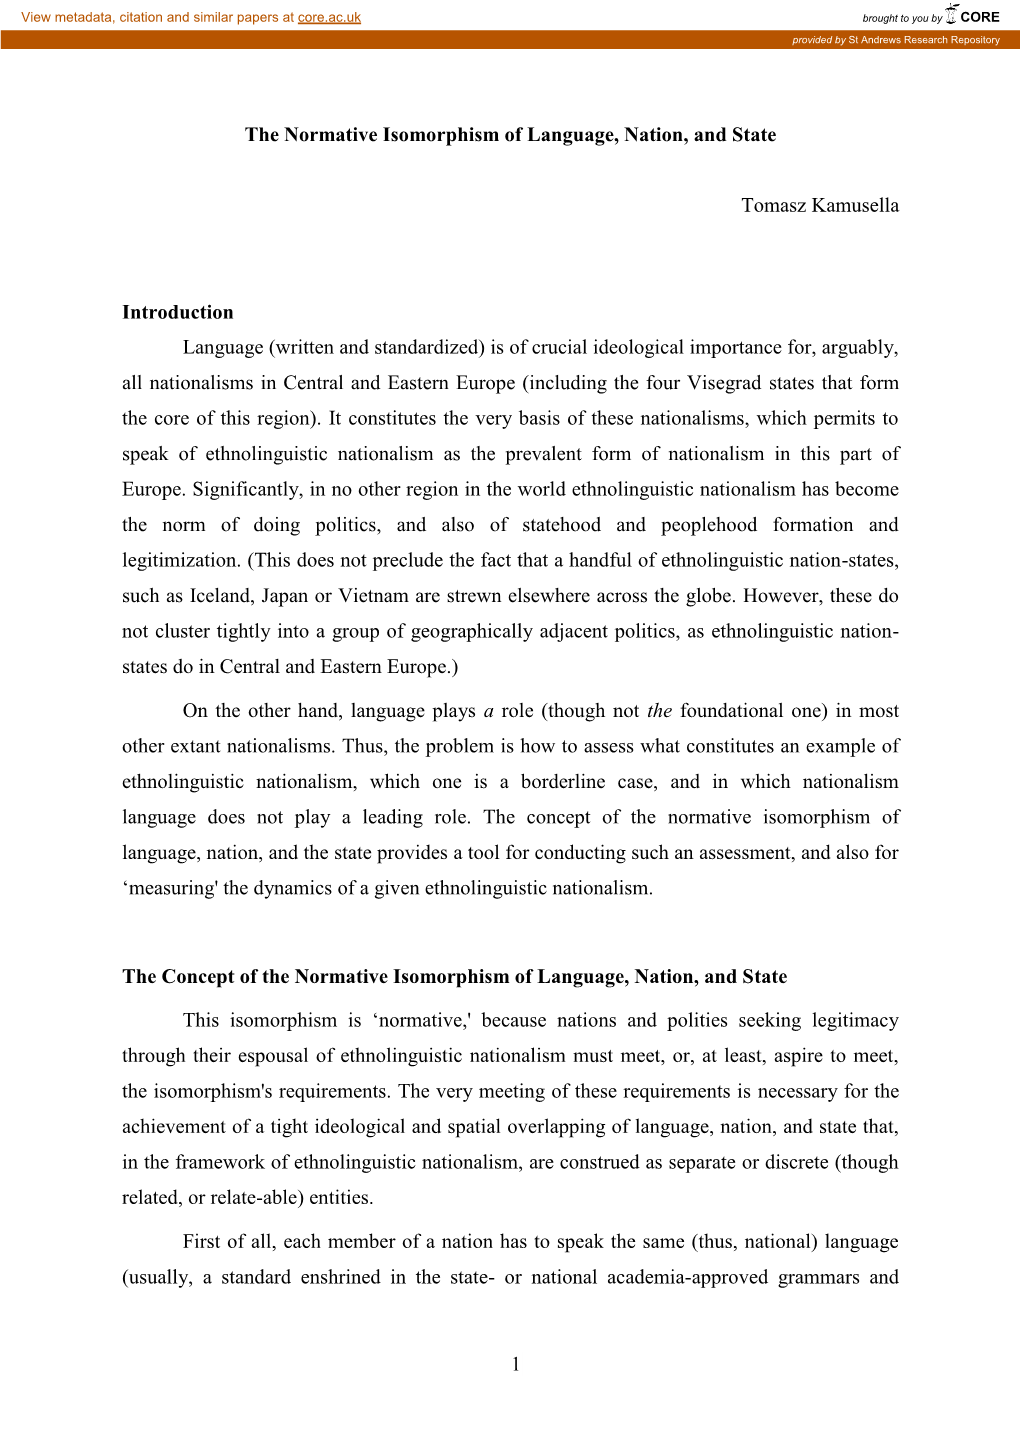 Isomorphism of Language, Nation and State”, in Hara, K